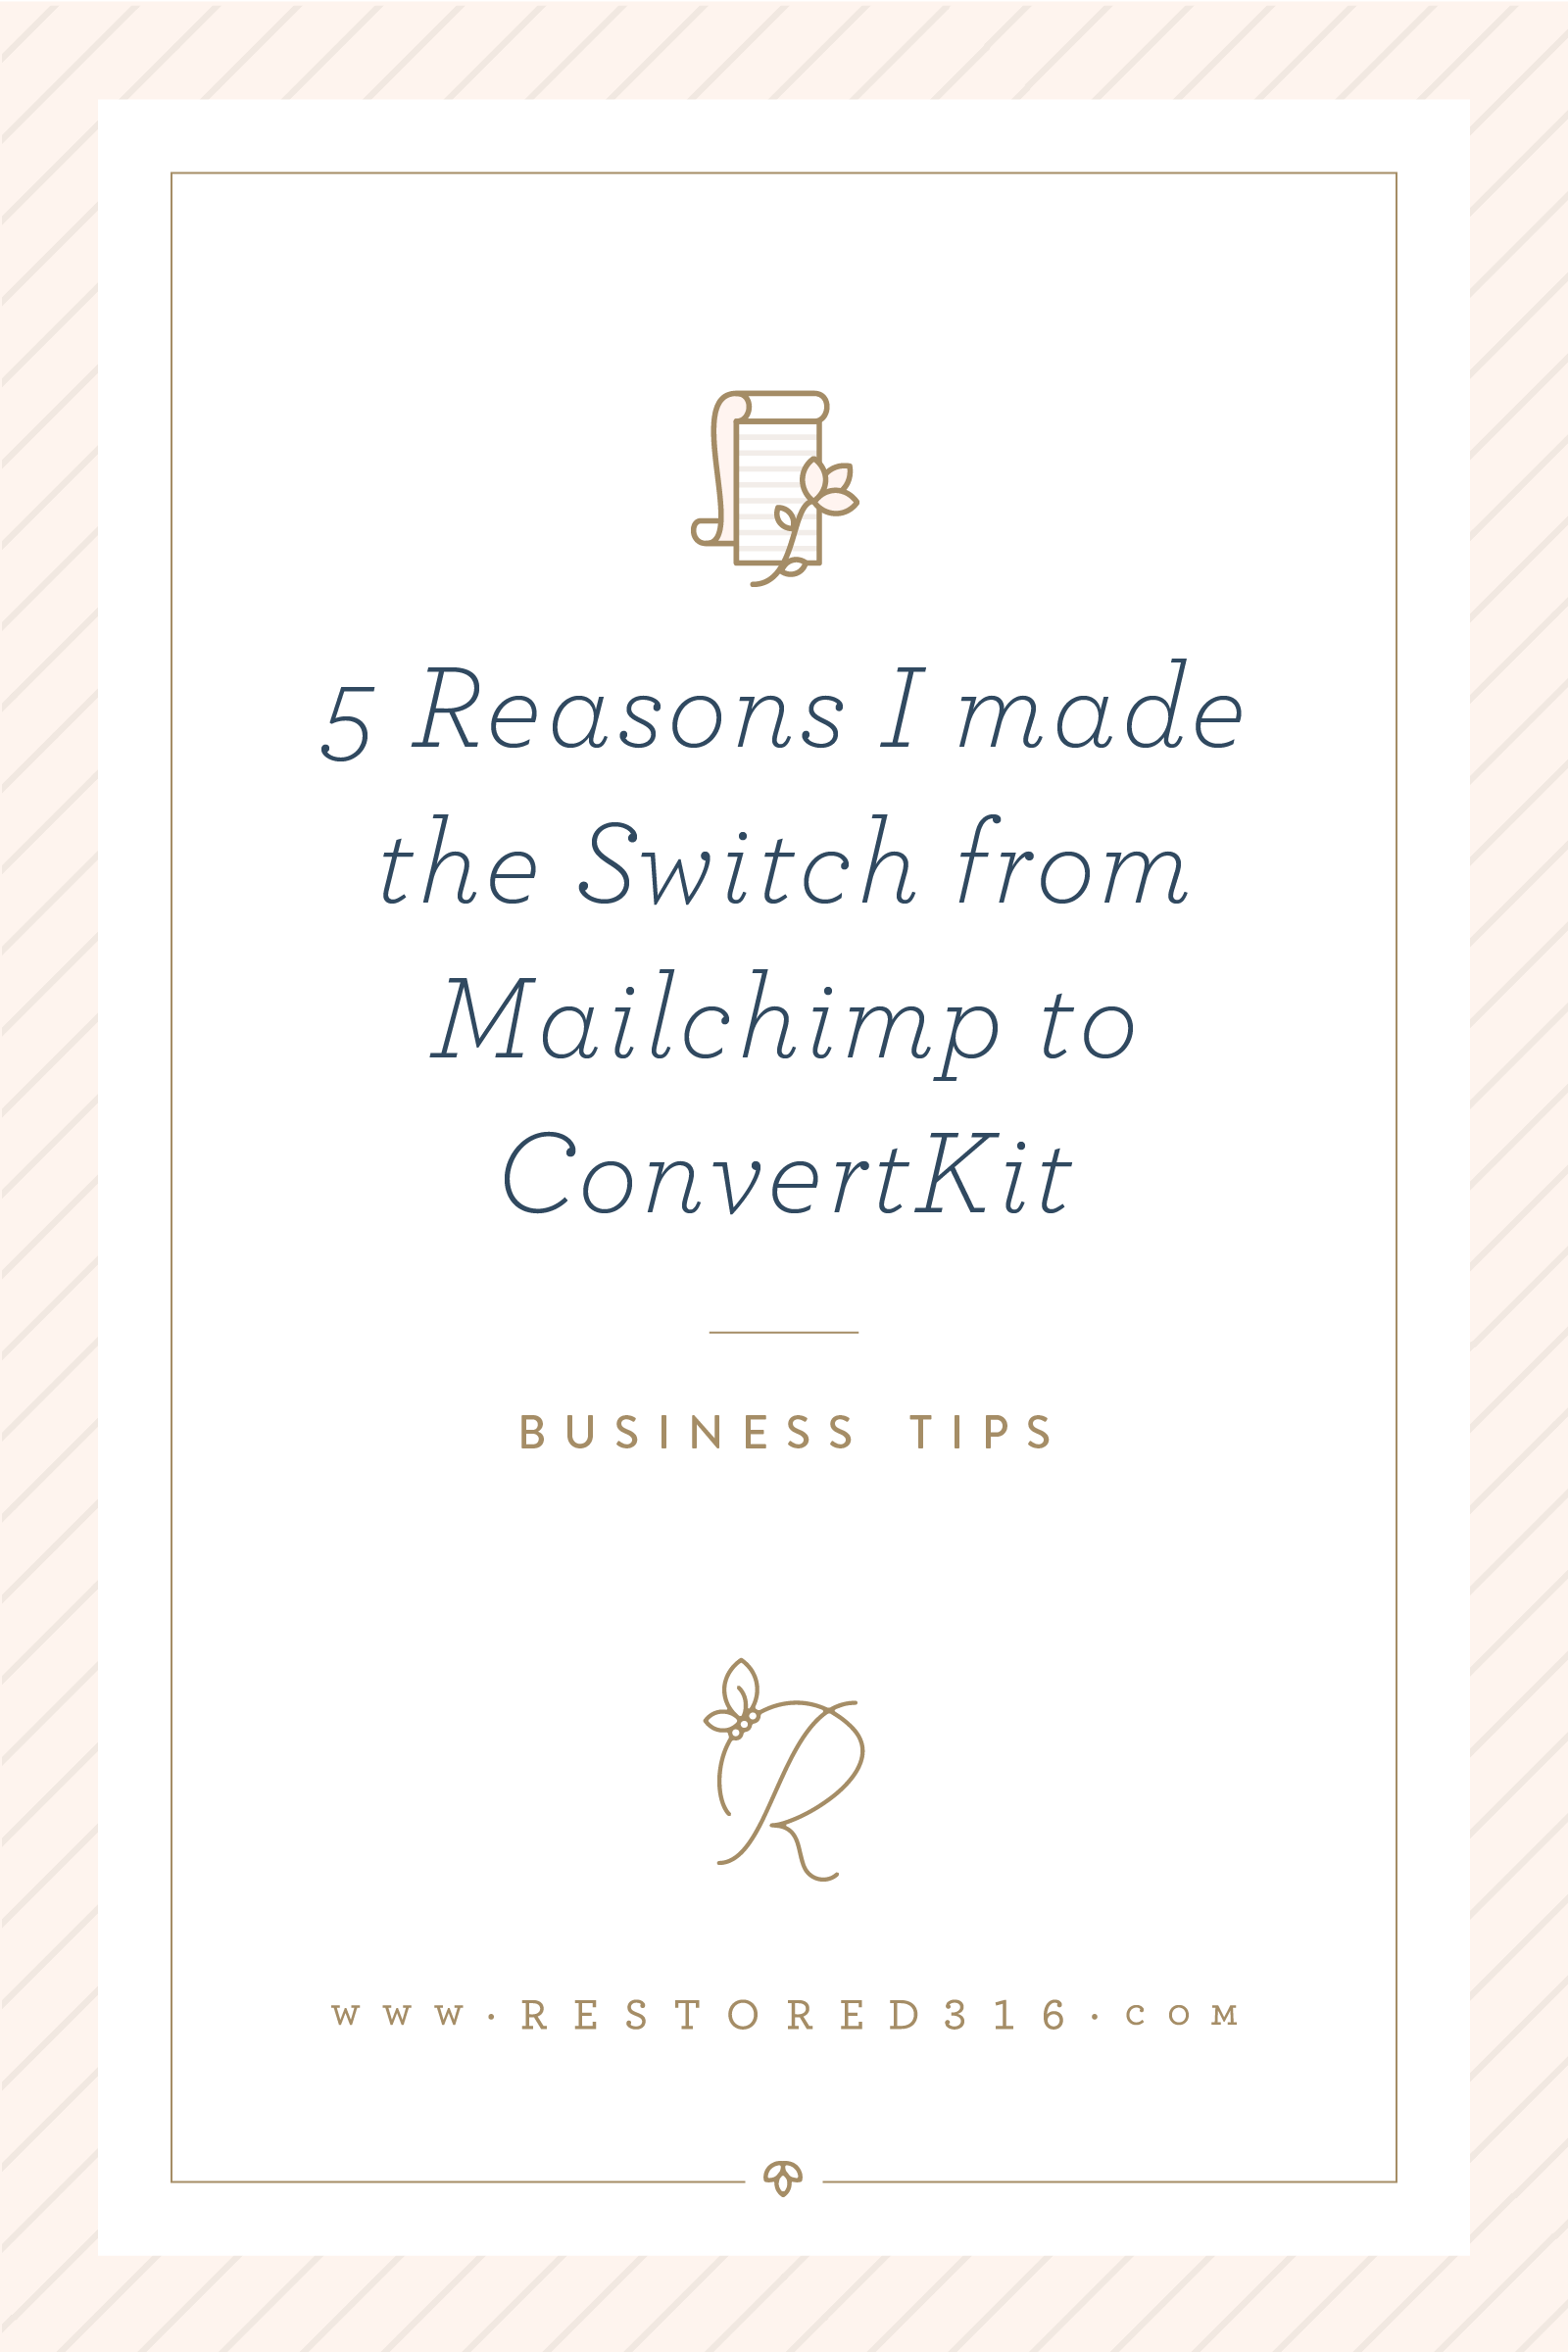 5 reasons I made the switch from Mailchimp to ConvertKit